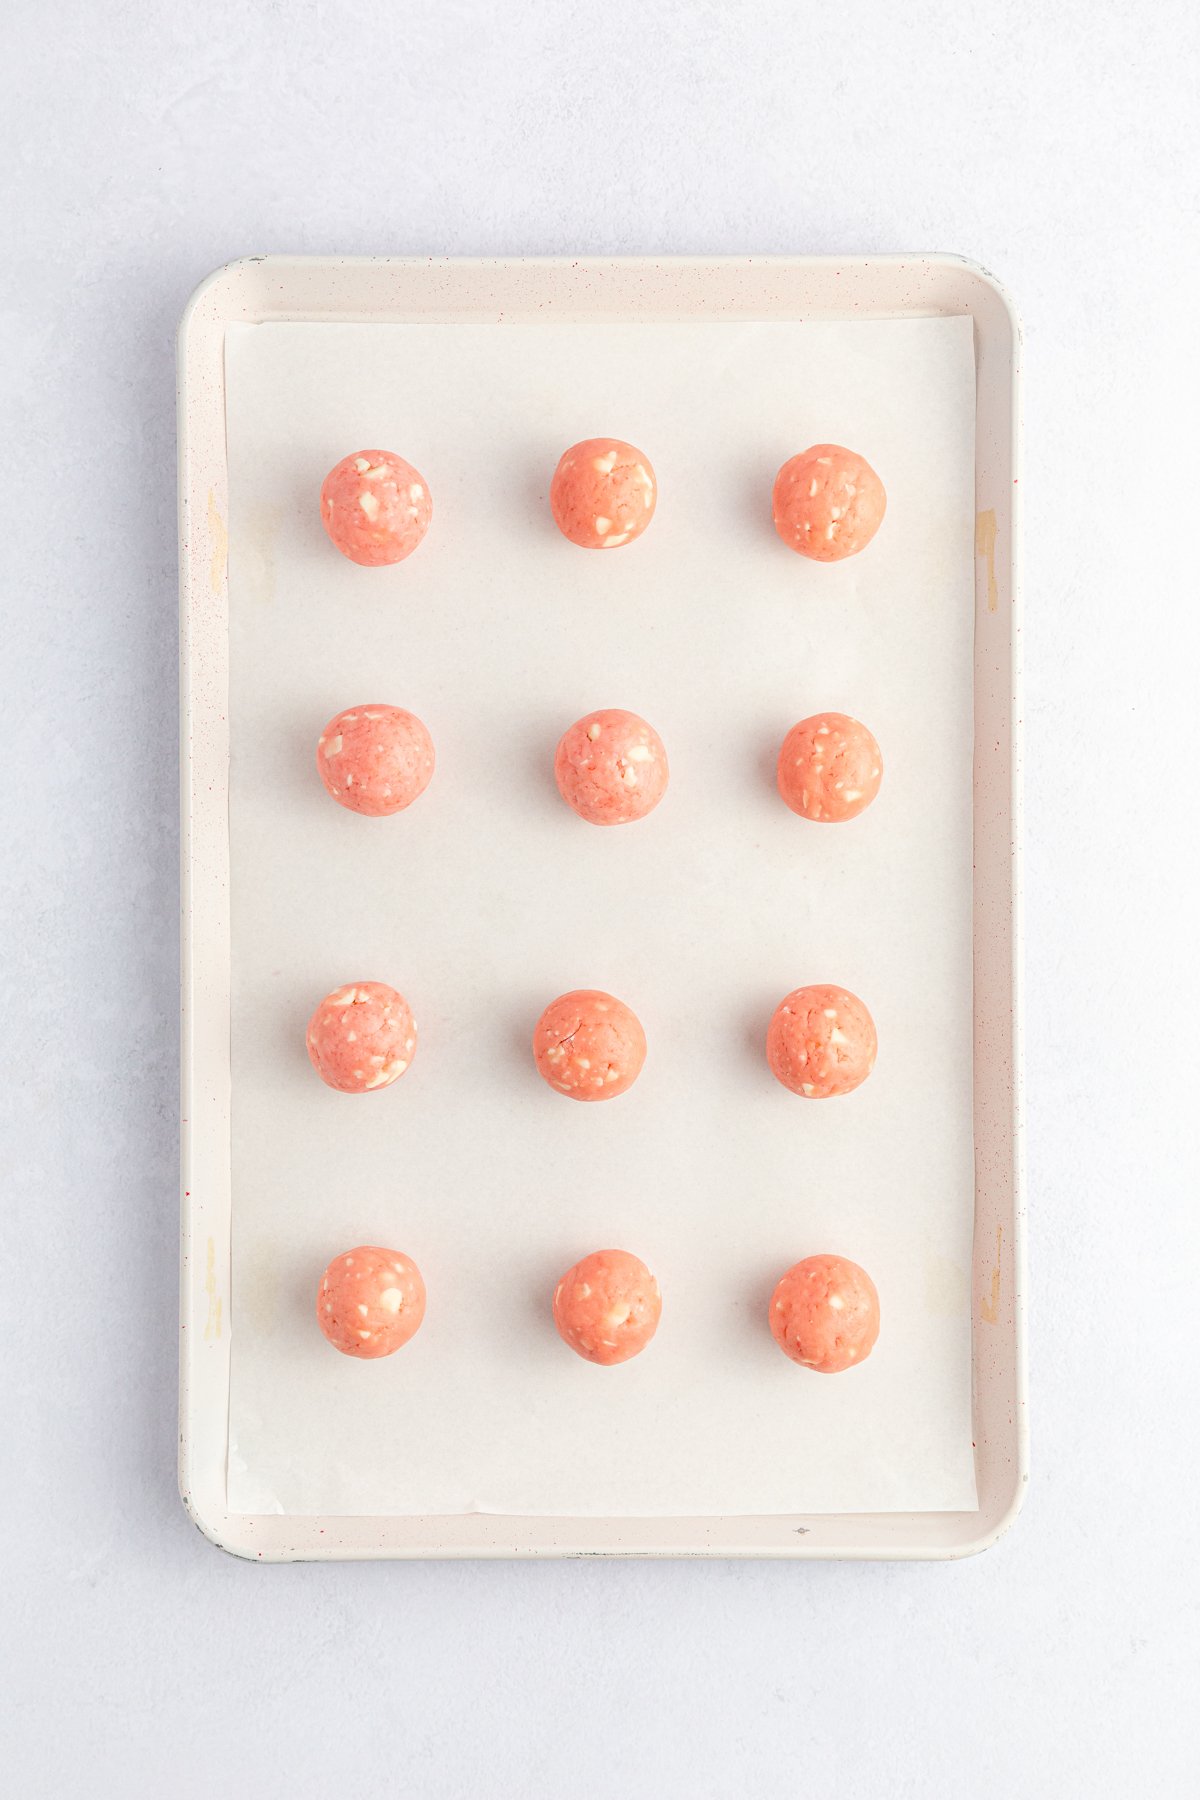 baking sheet with rolled strawberry cake mix balls